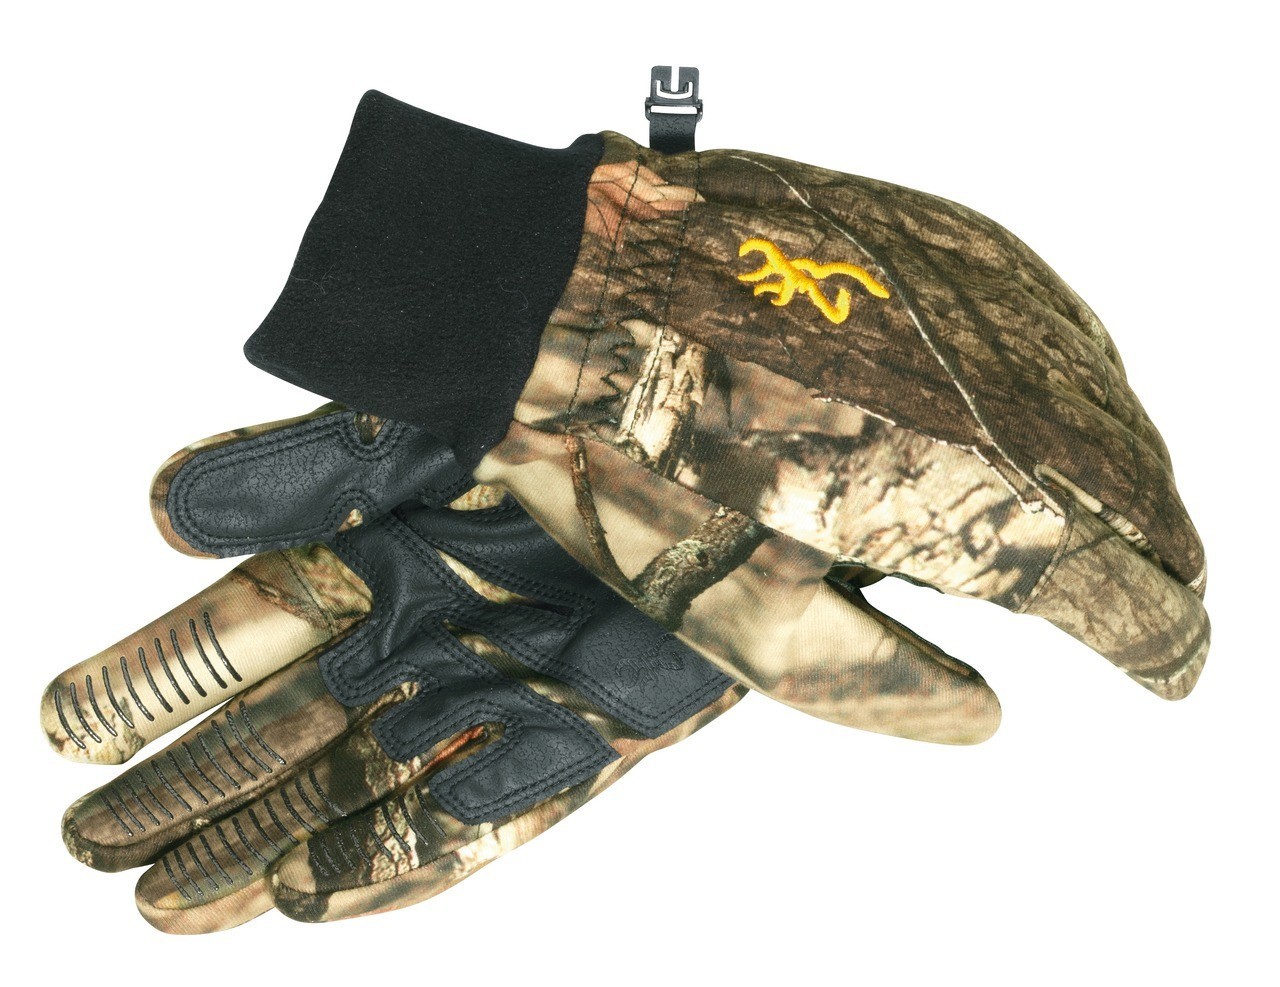 Gants de chasse Browning Hell's Canyon - Gants de chasse